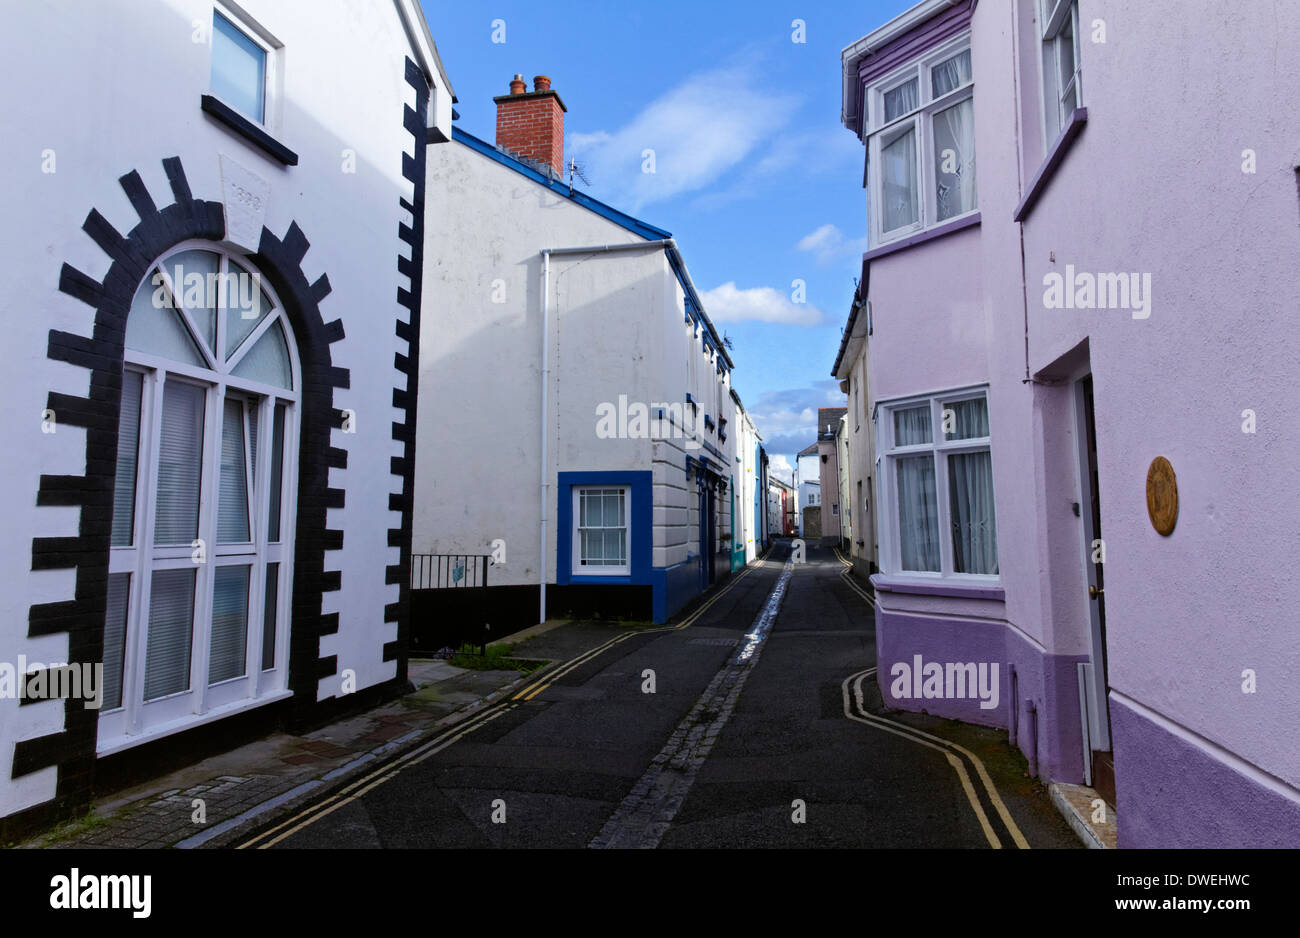 Street and houses in the village of Appledore, Devon, England Stock Photo